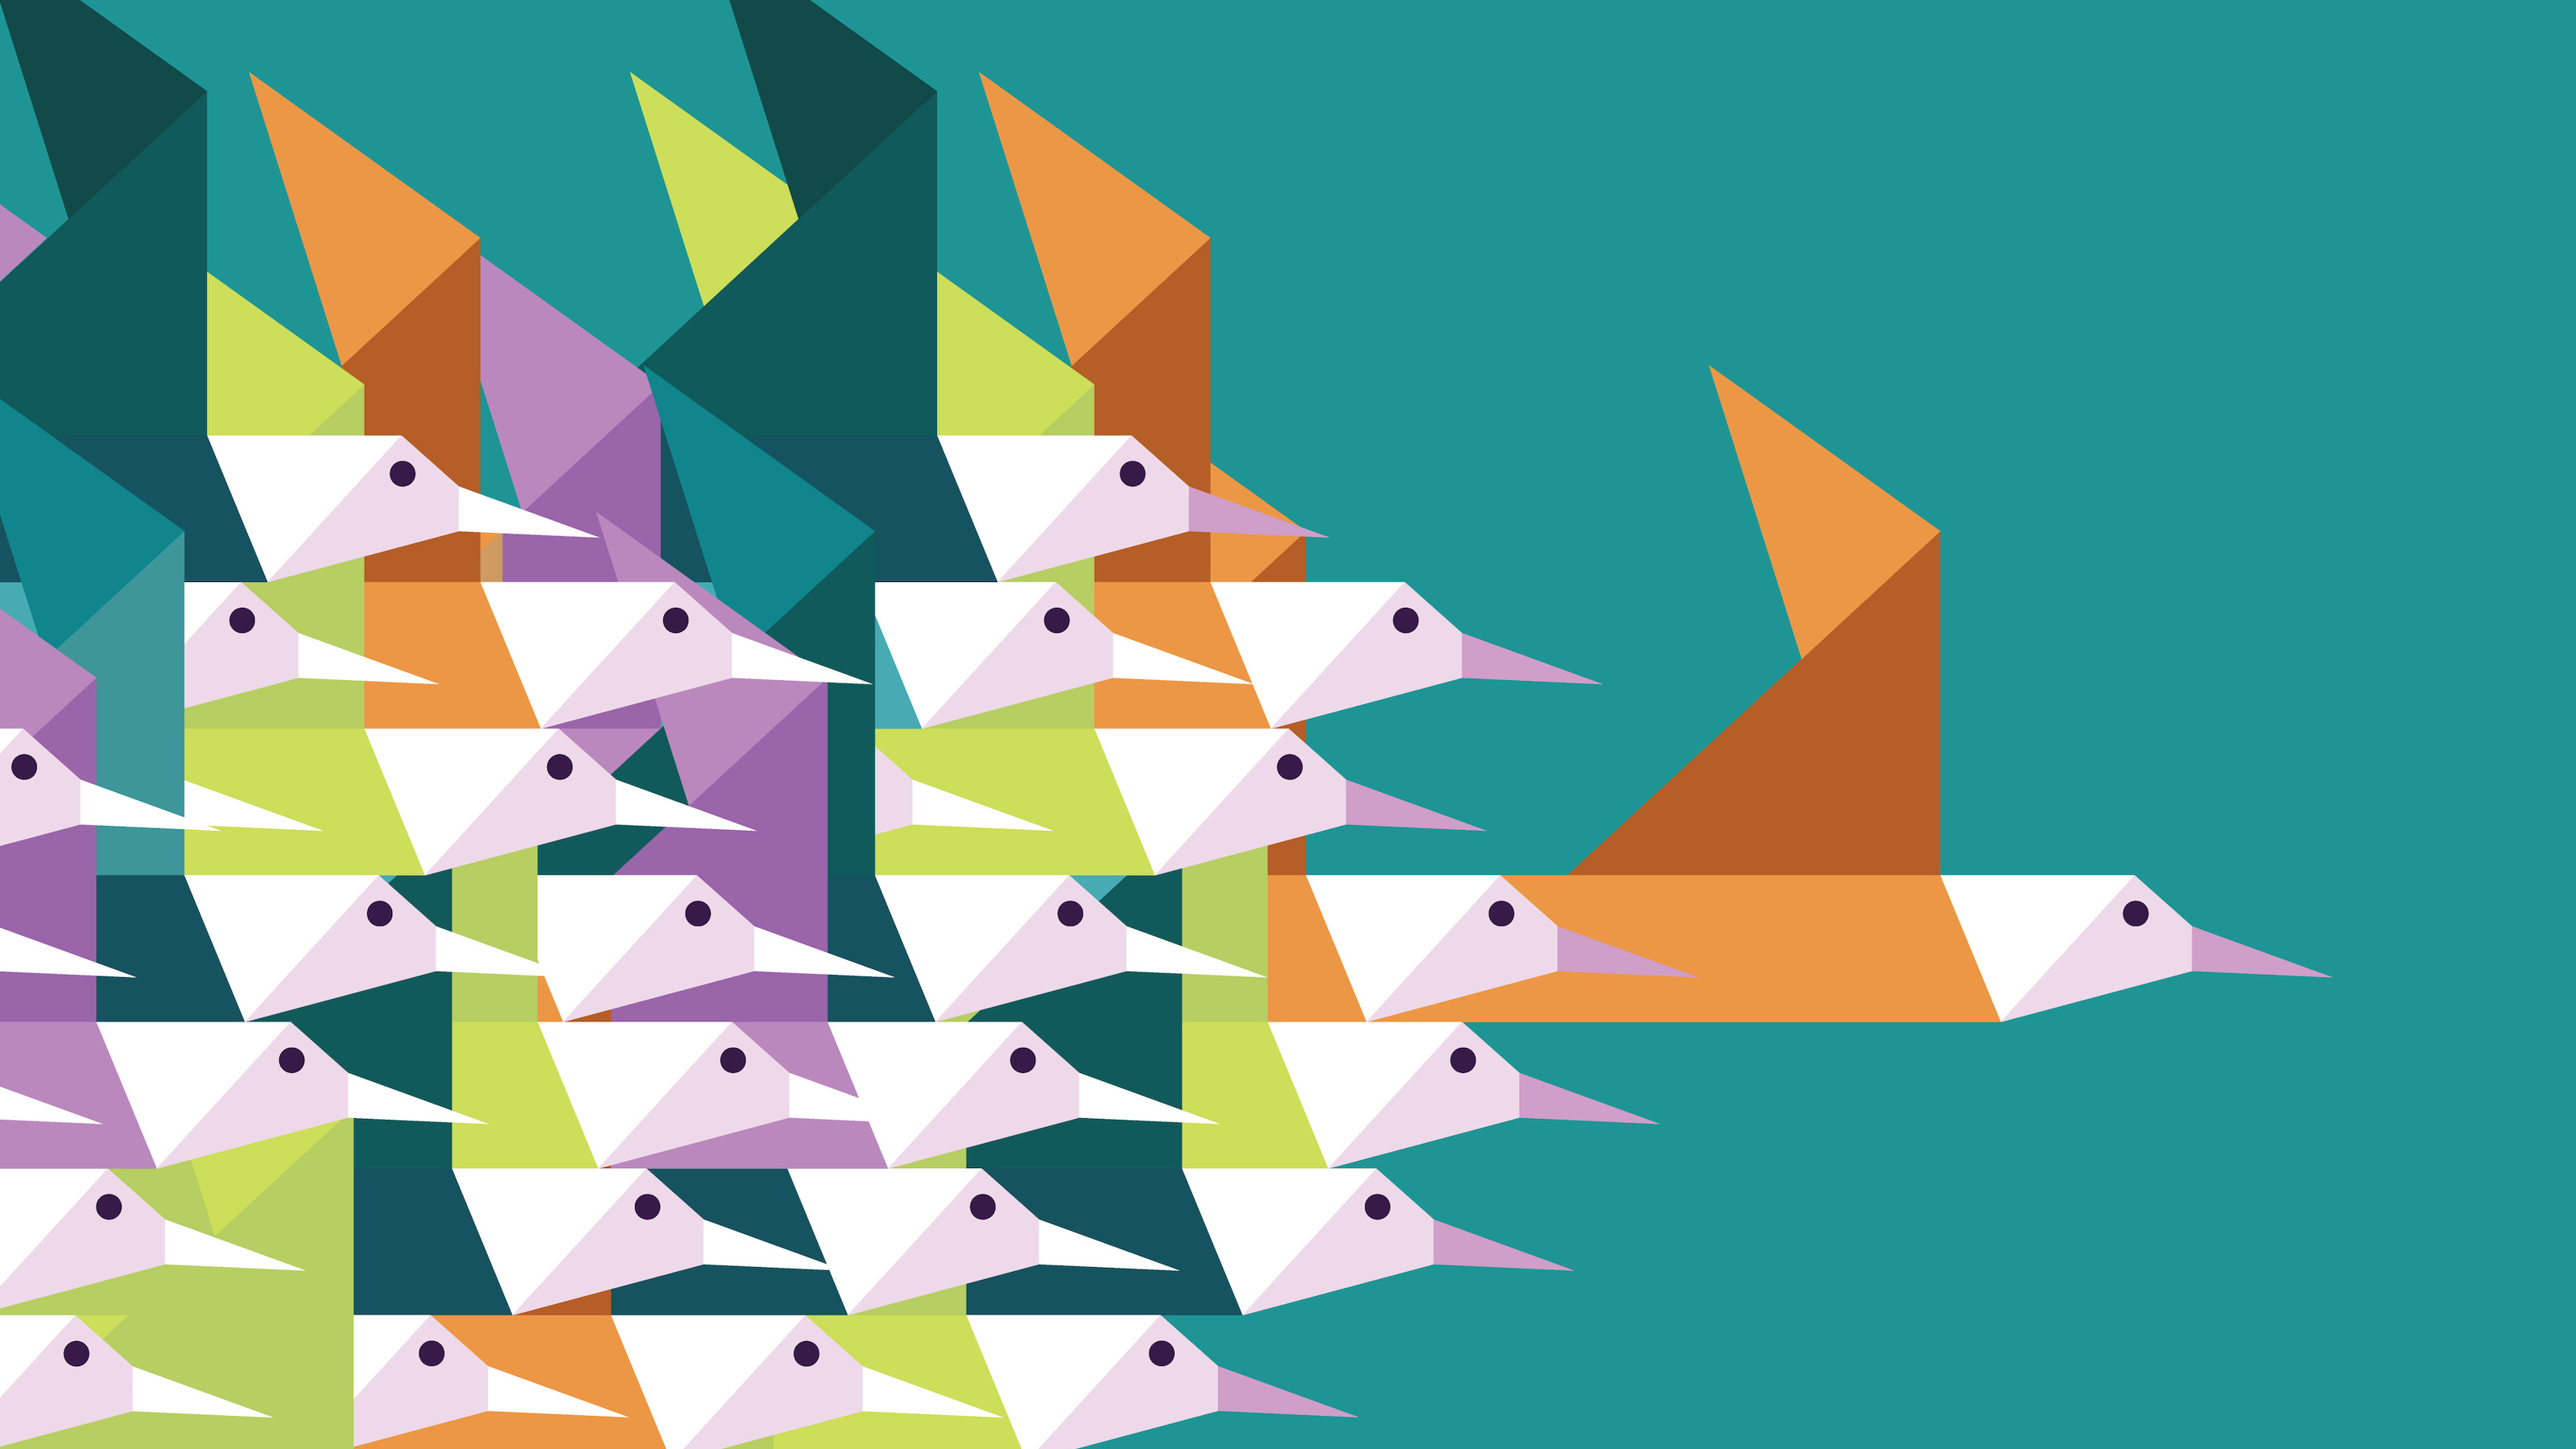 A geometric illustration of various birds in origami style, with one bird in the foreground distinguished by its size and color.